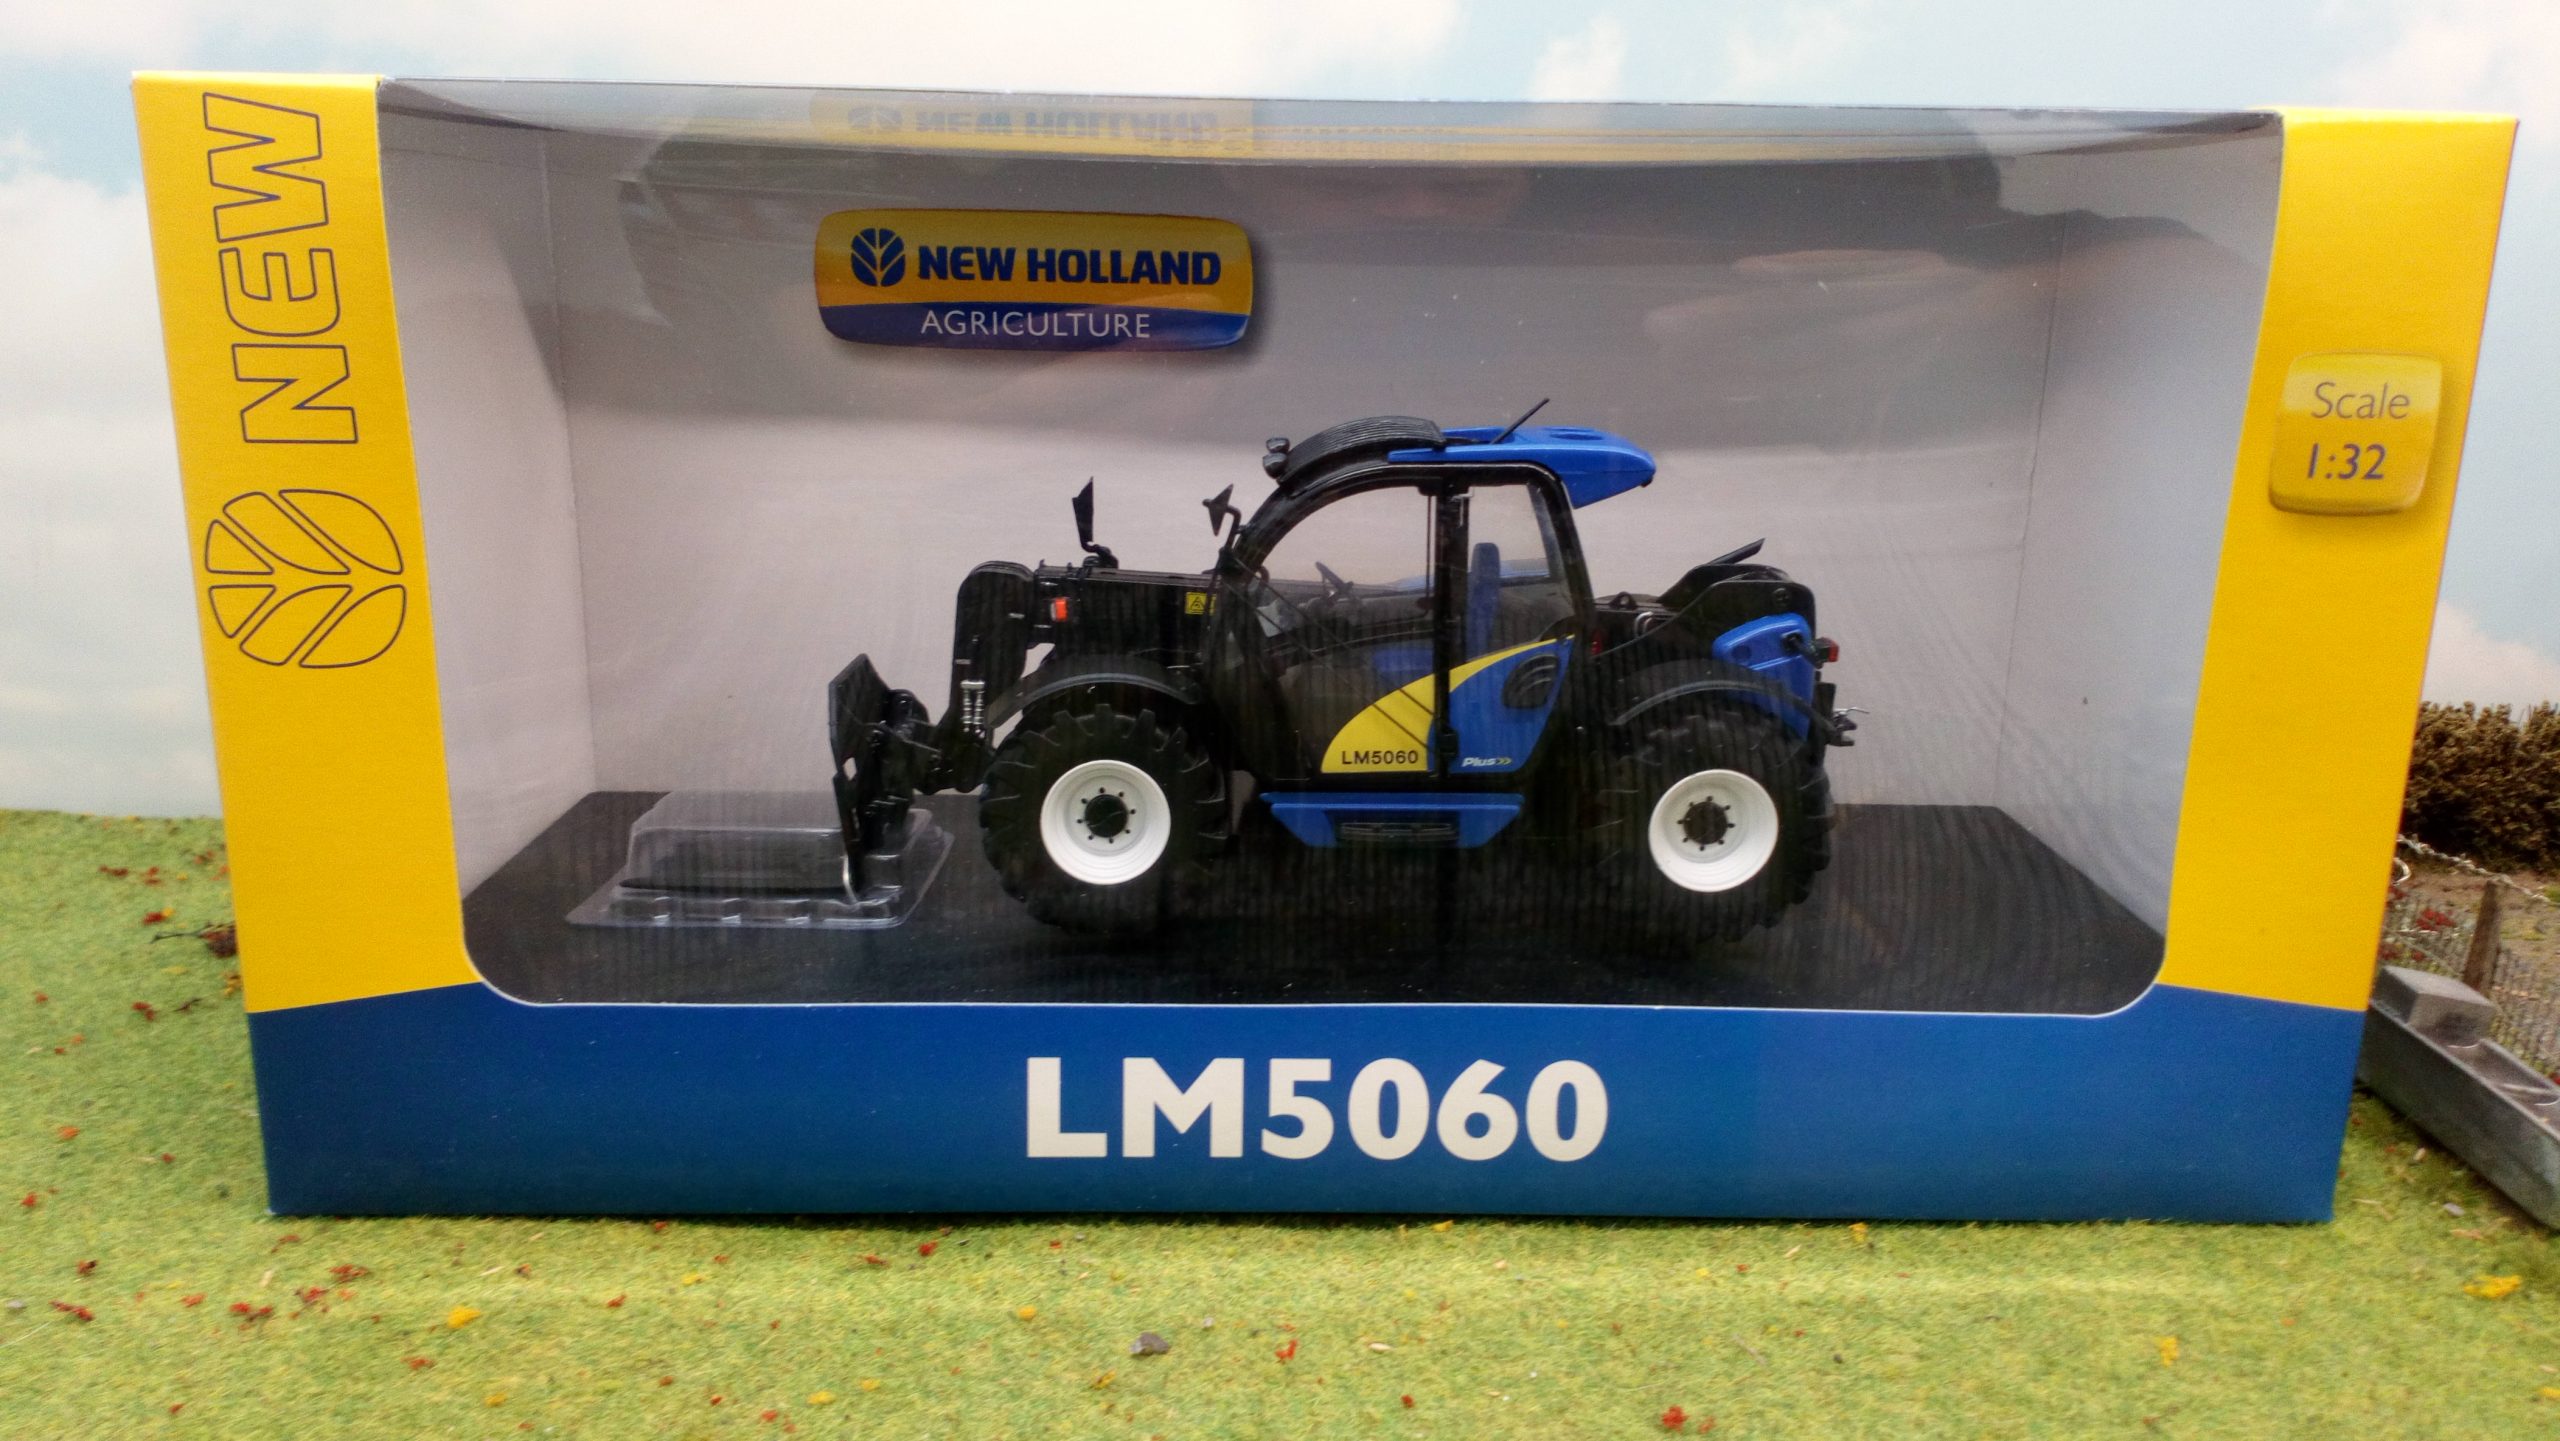 Details about   Universal Hobbies New Holland LM5060 Telehandler Scale 1:32 UH4009 